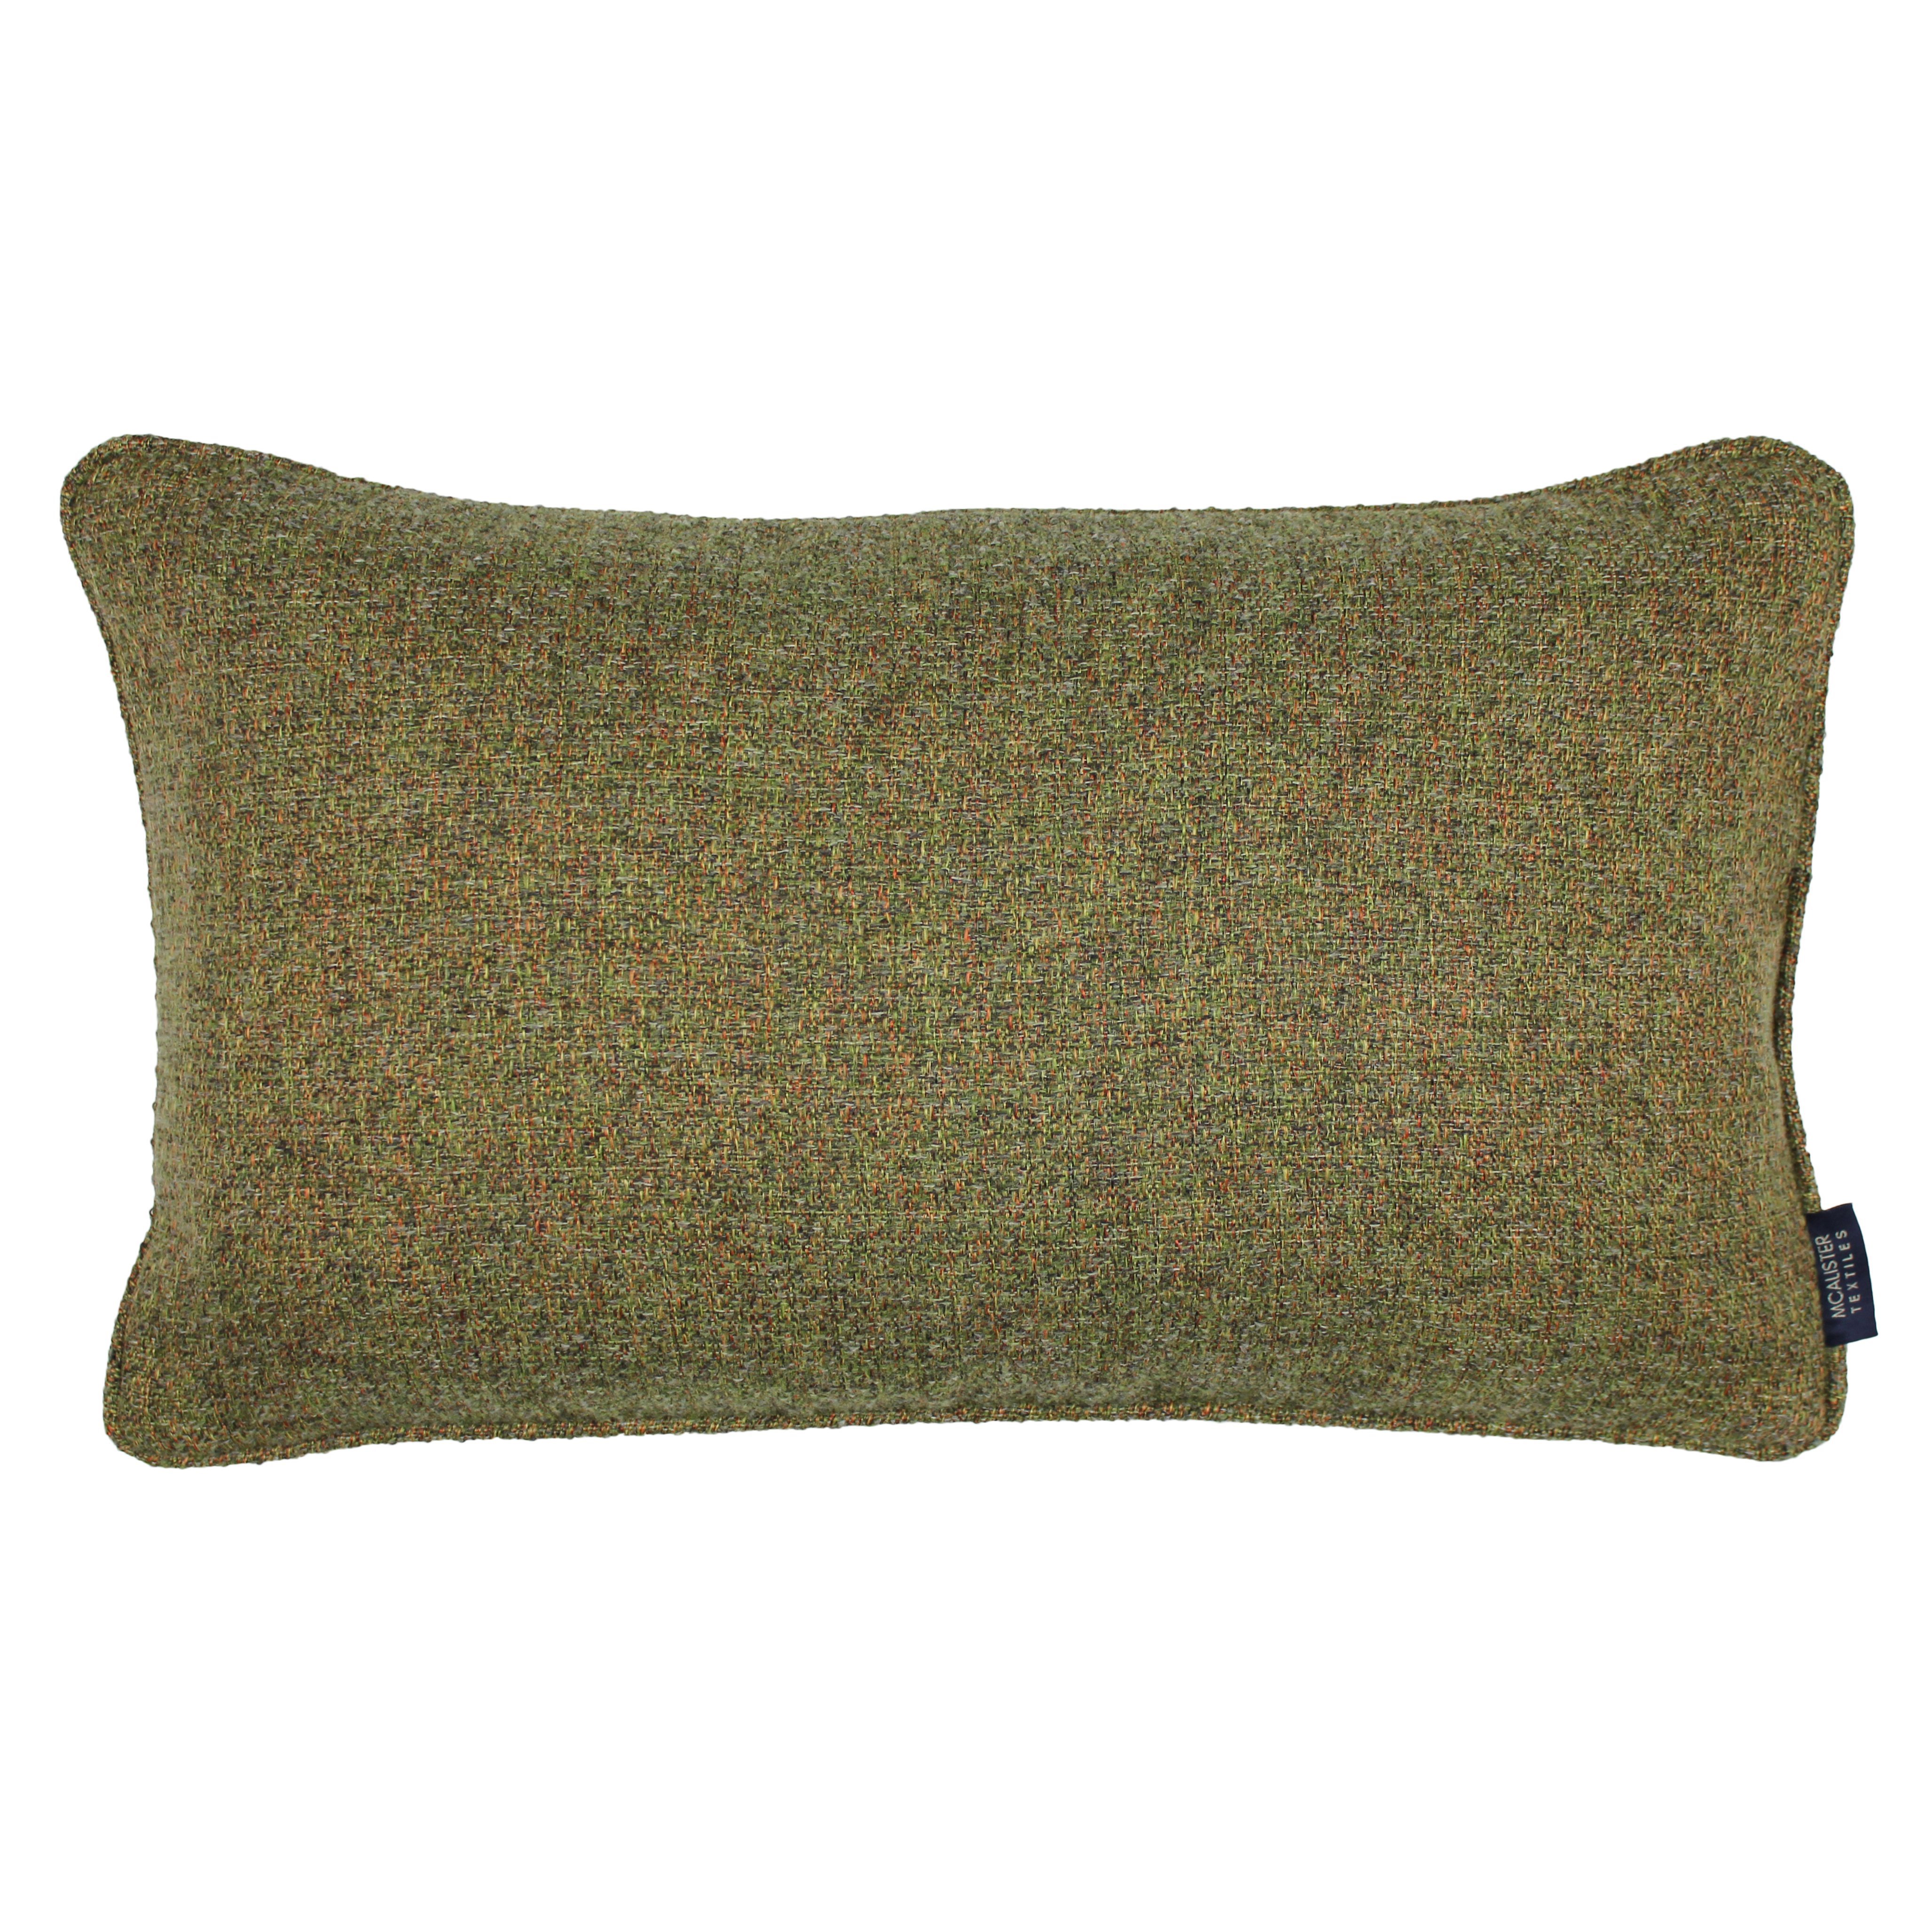 Highlands Forest Green Textured Plain Pillow, Cover Only / 50cm x 30cm